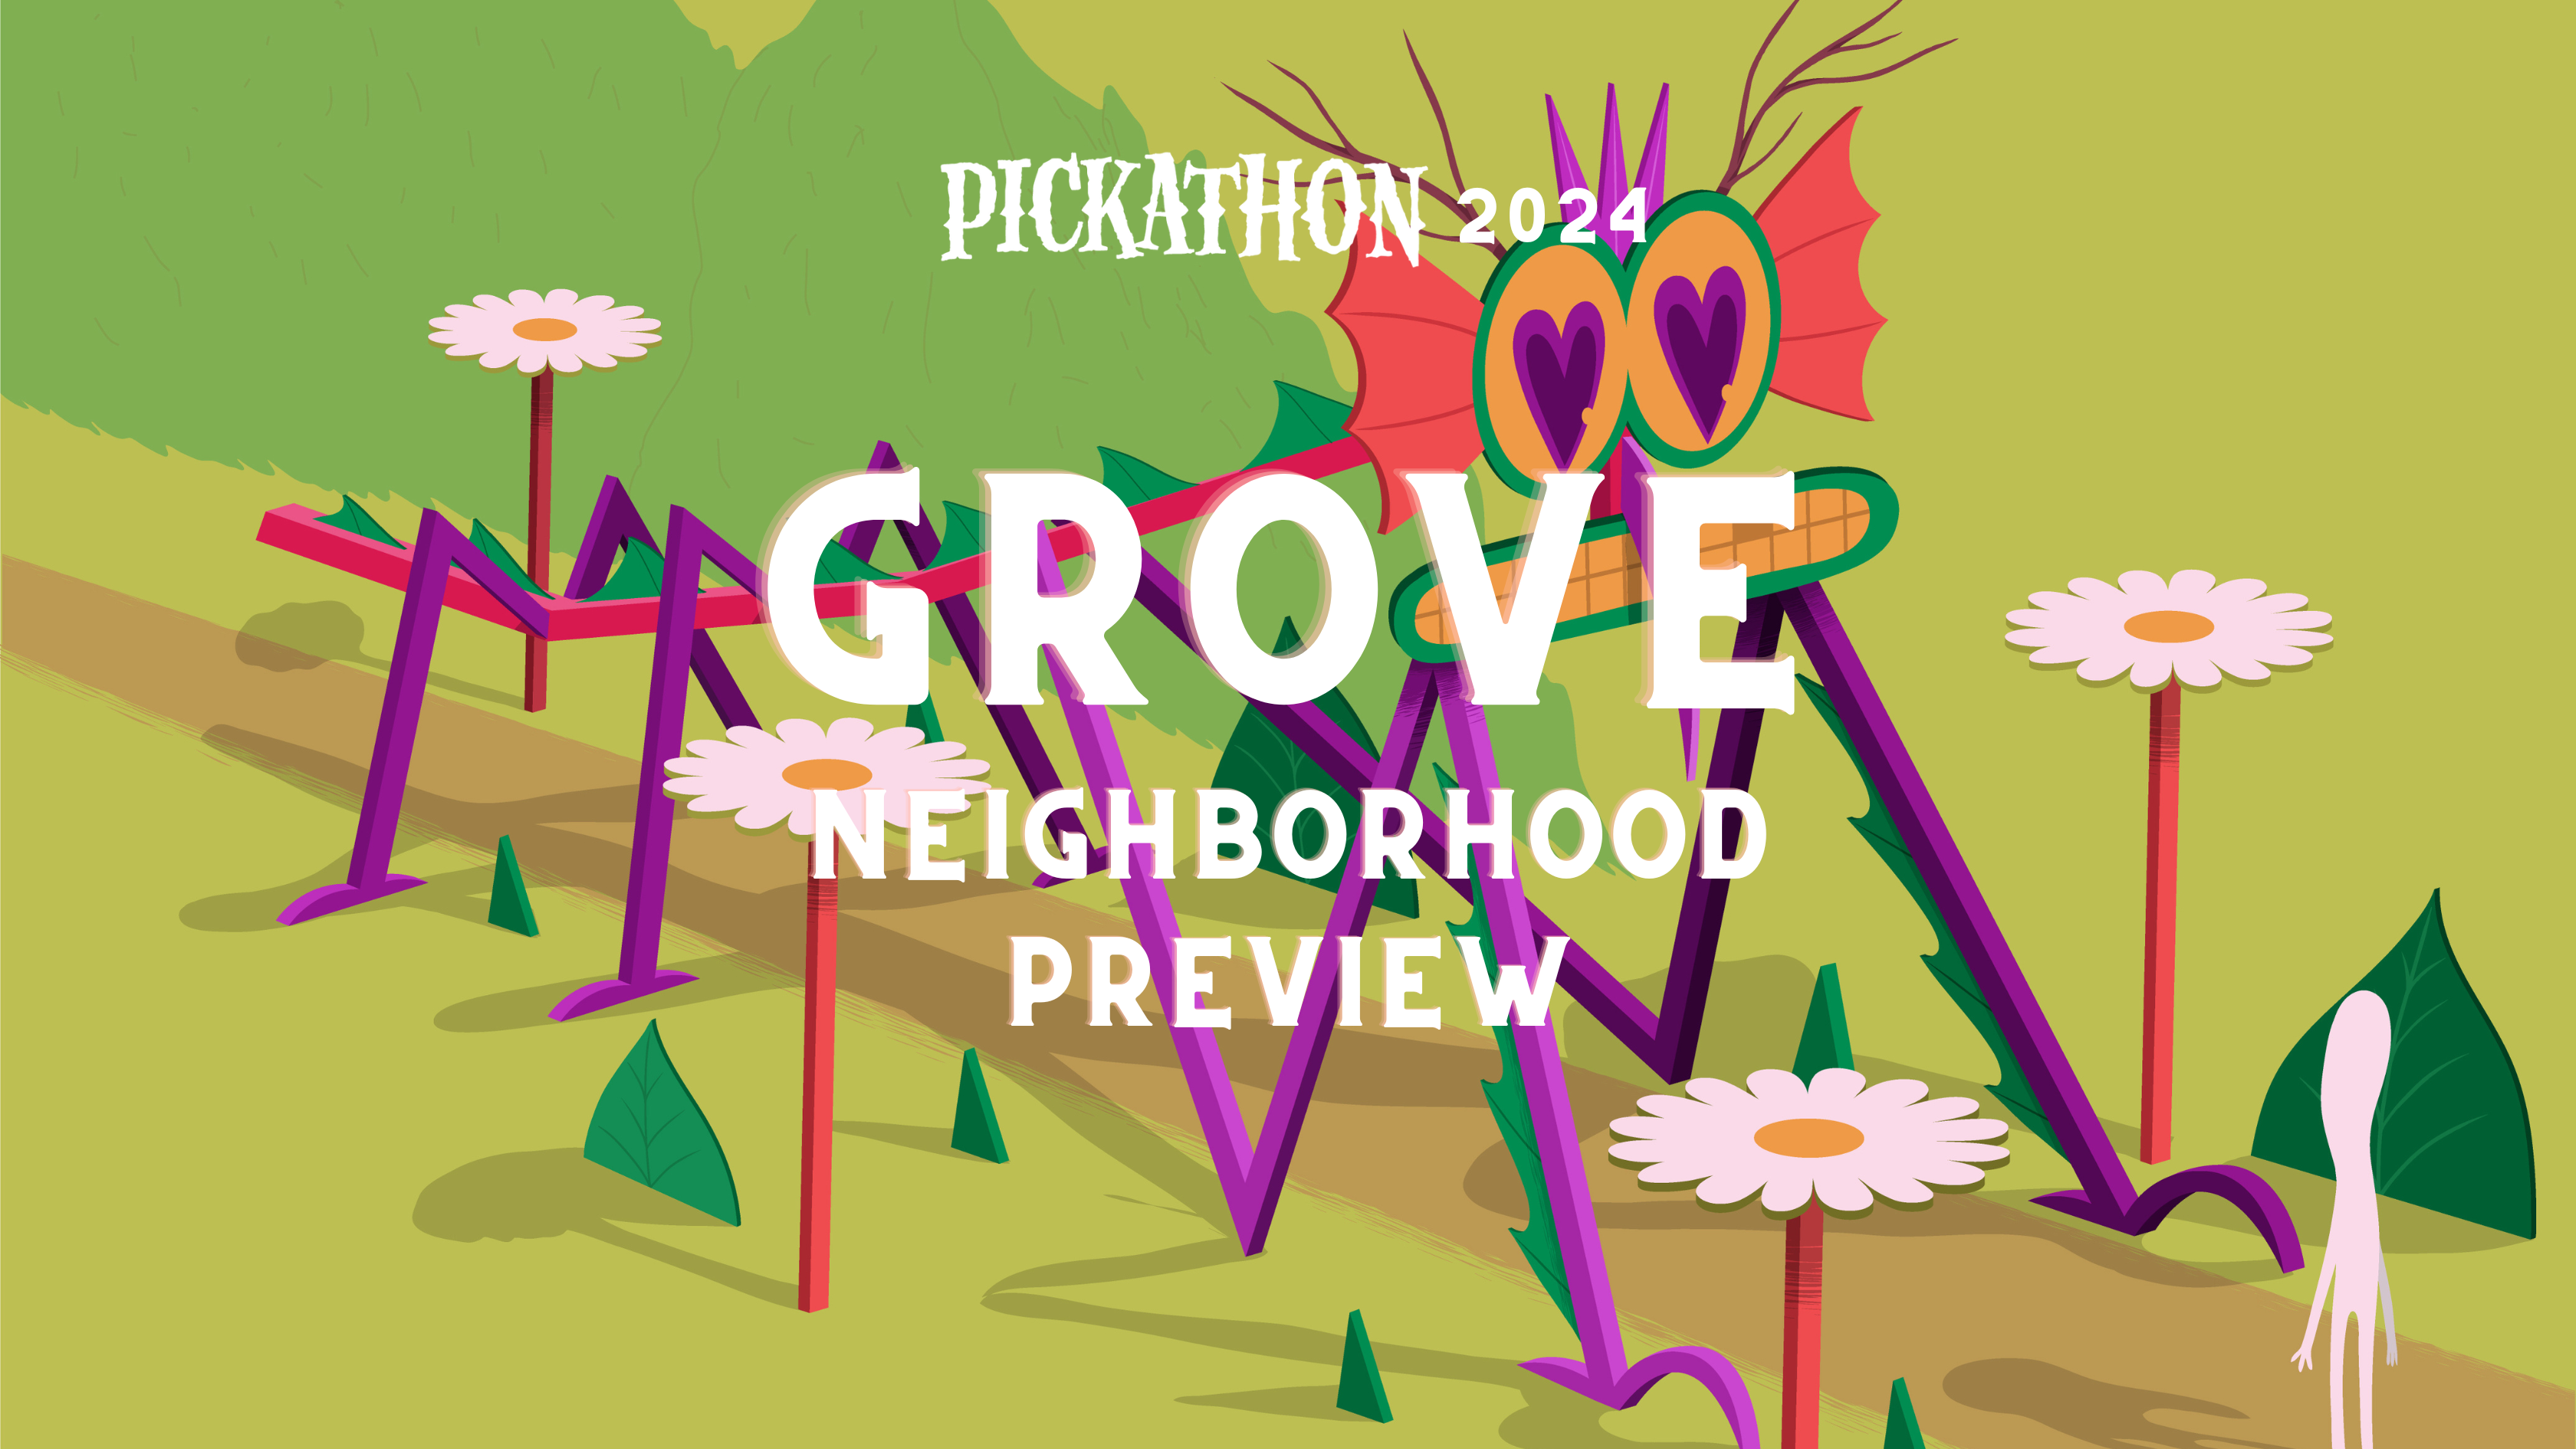 Grove Preview